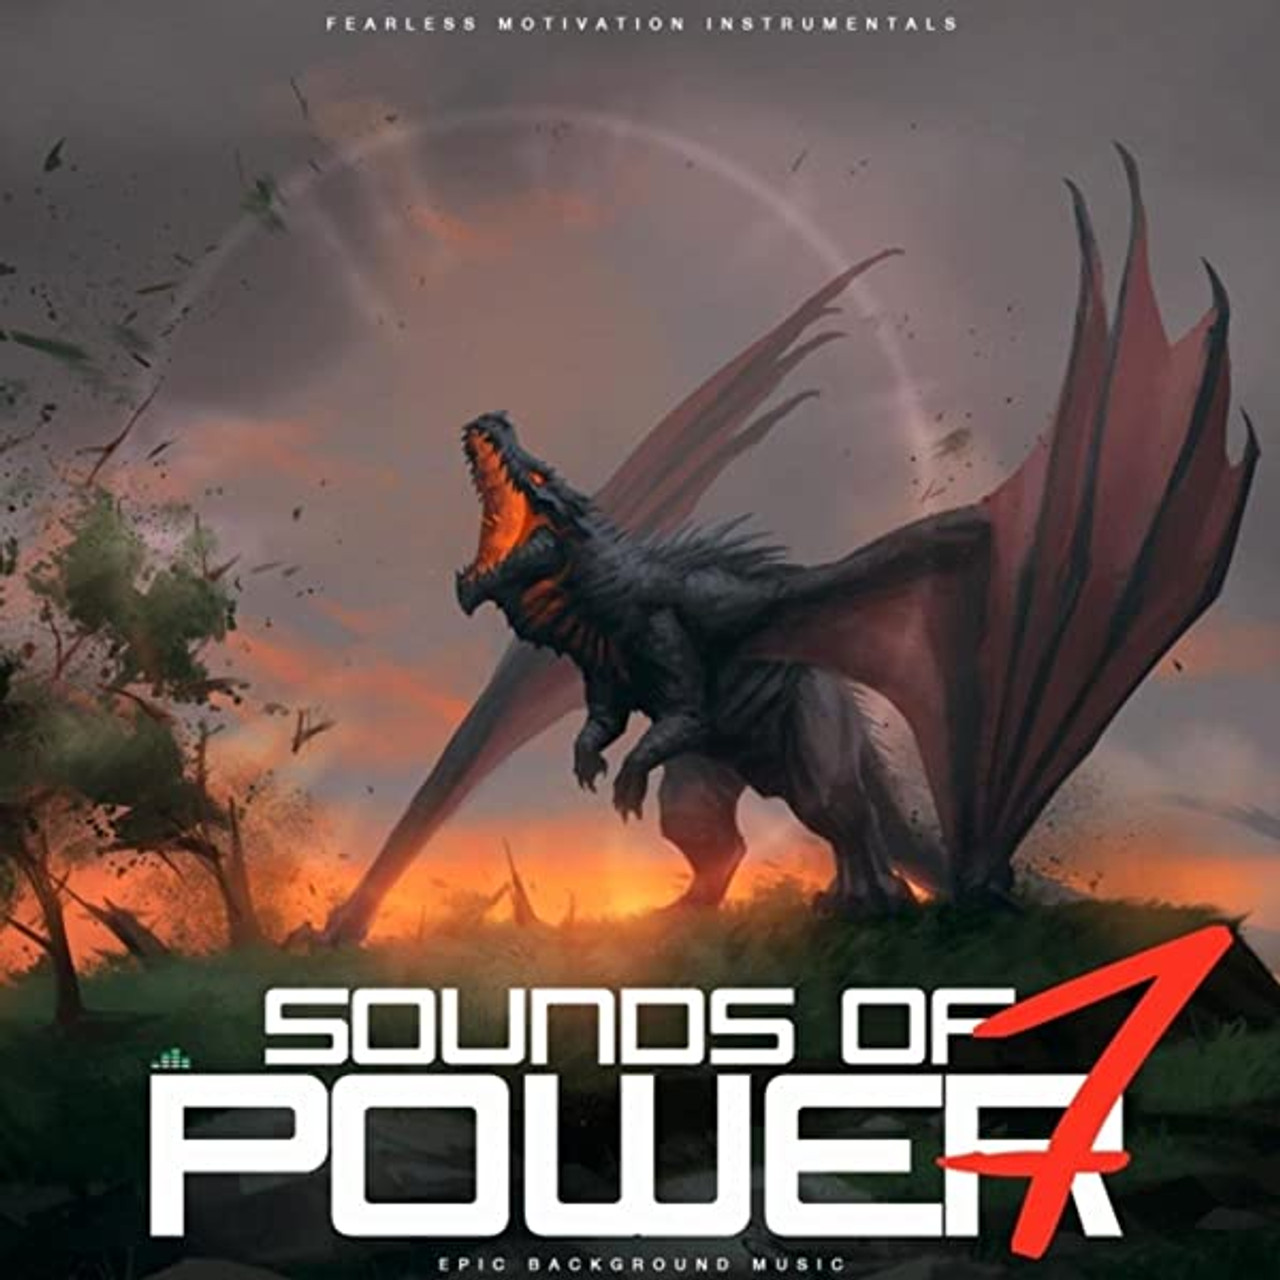 Sounds of Power 7: Epic Background Music (MP3 Download) - Team Fearless